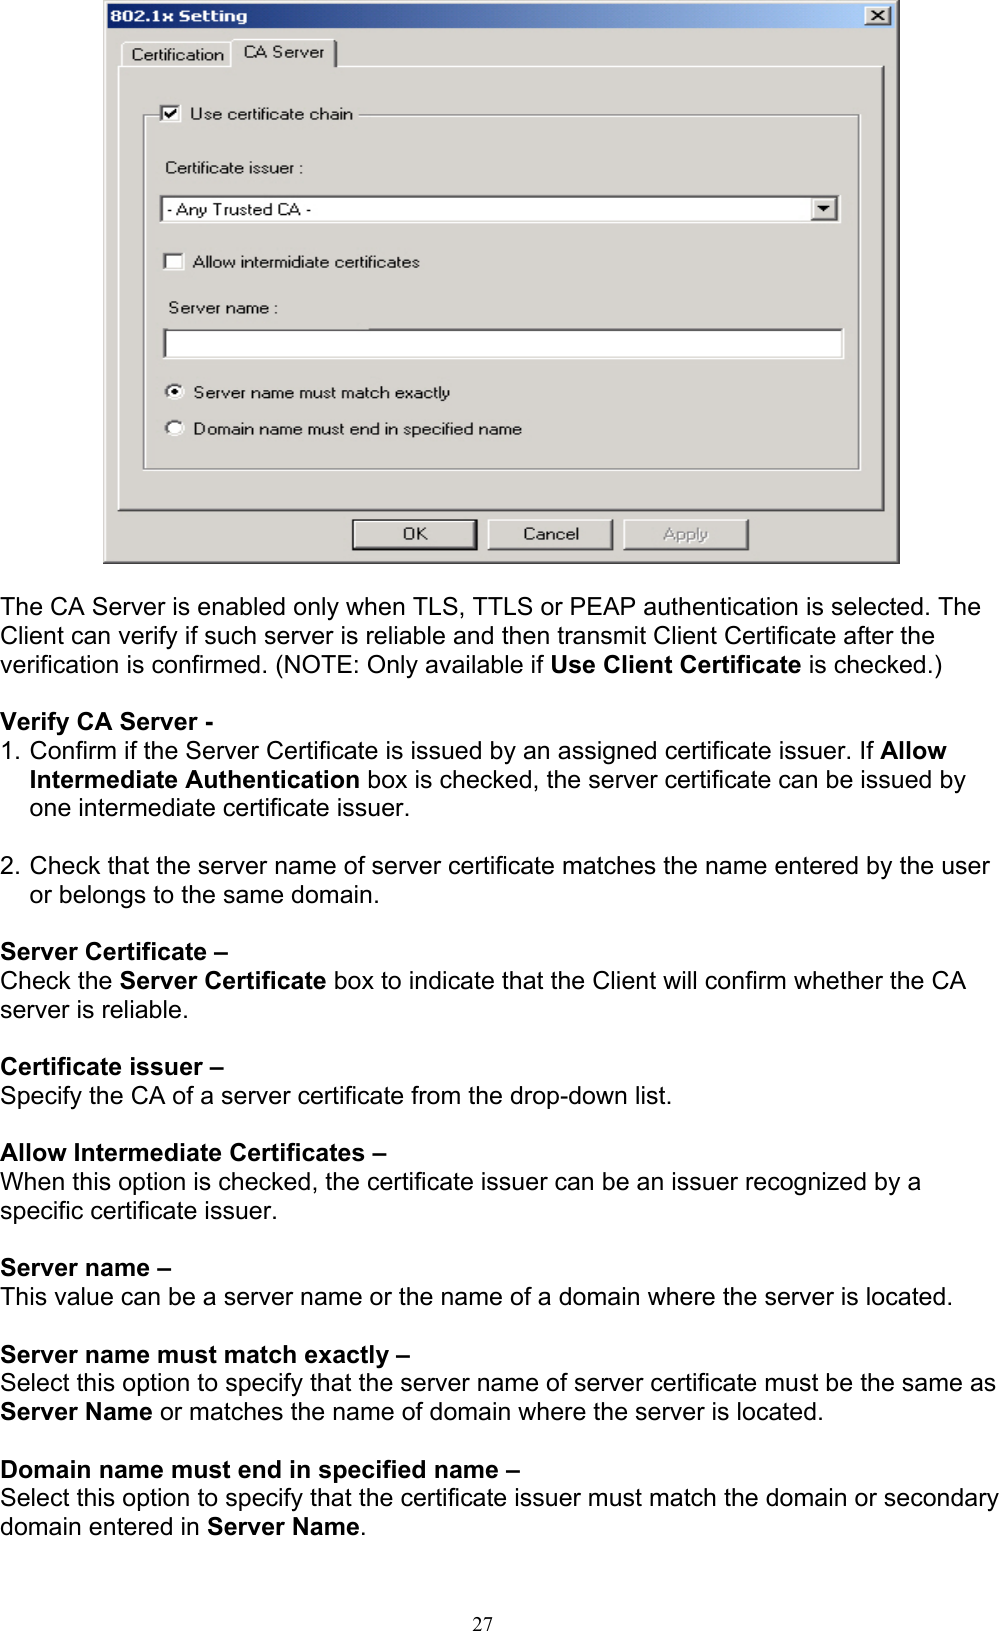 27     The CA Server is enabled only when TLS, TTLS or PEAP authentication is selected. The Client can verify if such server is reliable and then transmit Client Certificate after the verification is confirmed. (NOTE: Only available if Use Client Certificate is checked.)  Verify CA Server -   1. Confirm if the Server Certificate is issued by an assigned certificate issuer. If Allow Intermediate Authentication box is checked, the server certificate can be issued by one intermediate certificate issuer.  2. Check that the server name of server certificate matches the name entered by the user or belongs to the same domain.  Server Certificate –   Check the Server Certificate box to indicate that the Client will confirm whether the CA server is reliable.  Certificate issuer –   Specify the CA of a server certificate from the drop-down list.  Allow Intermediate Certificates –   When this option is checked, the certificate issuer can be an issuer recognized by a specific certificate issuer.    Server name –   This value can be a server name or the name of a domain where the server is located.  Server name must match exactly –   Select this option to specify that the server name of server certificate must be the same as Server Name or matches the name of domain where the server is located.  Domain name must end in specified name –   Select this option to specify that the certificate issuer must match the domain or secondary domain entered in Server Name.  